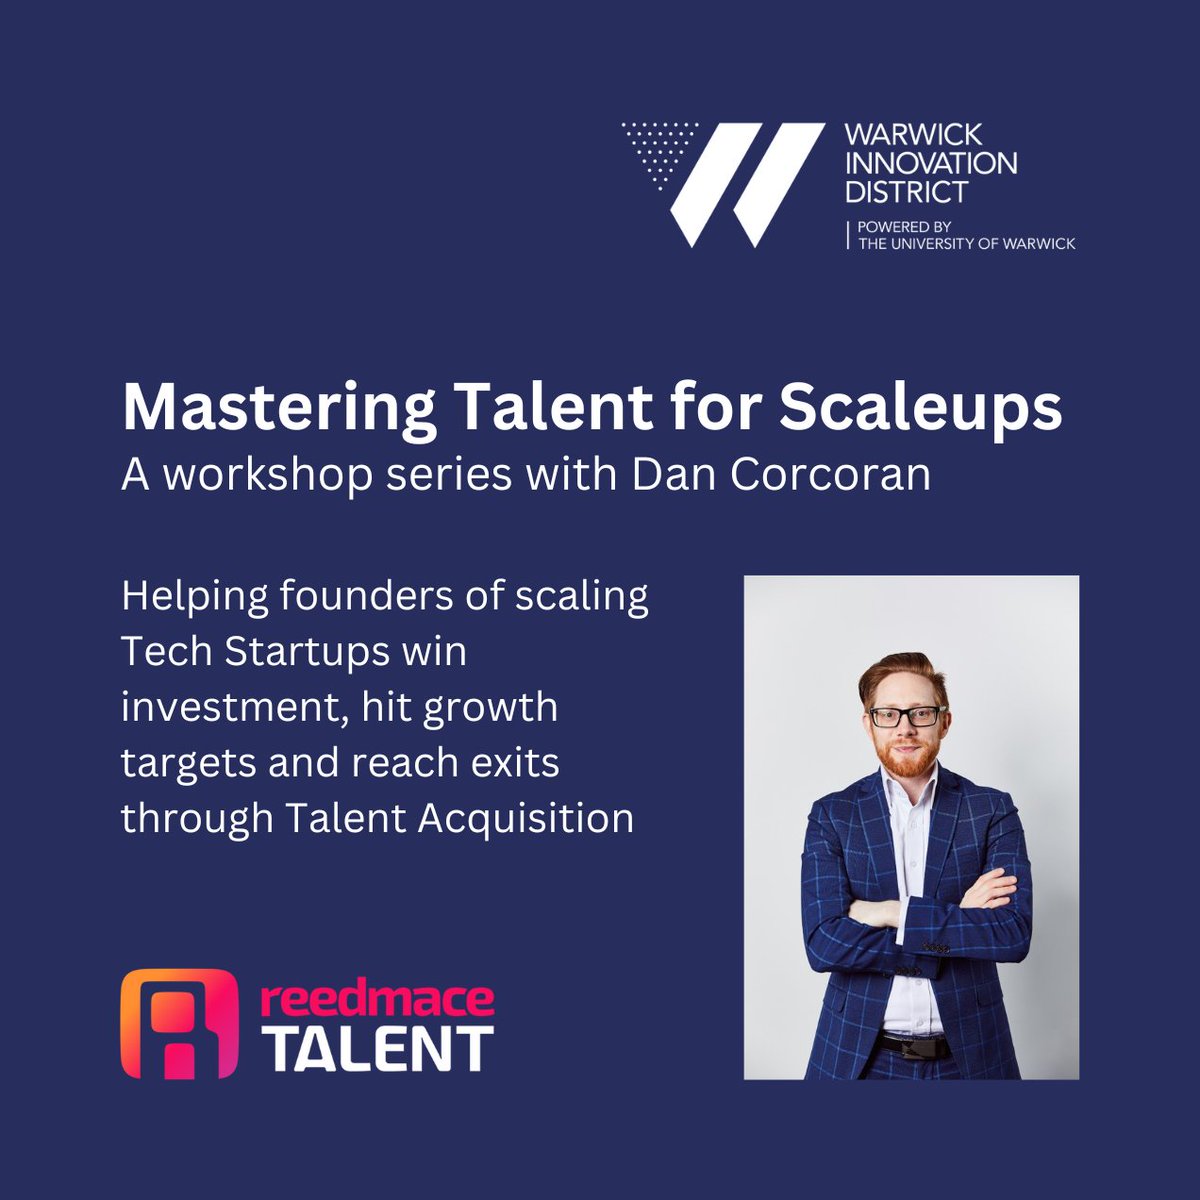 Our next #workshop at @uniofwarwick is tomorrow with @DanCorcoran79 How Talent Acquisition helps #scaleups raise #Investment, grow and exit. These interactive workshops are for founders of scaling tech startups. #BusinessSupport Register free here: eventbrite.co.uk/e/how-talent-a…